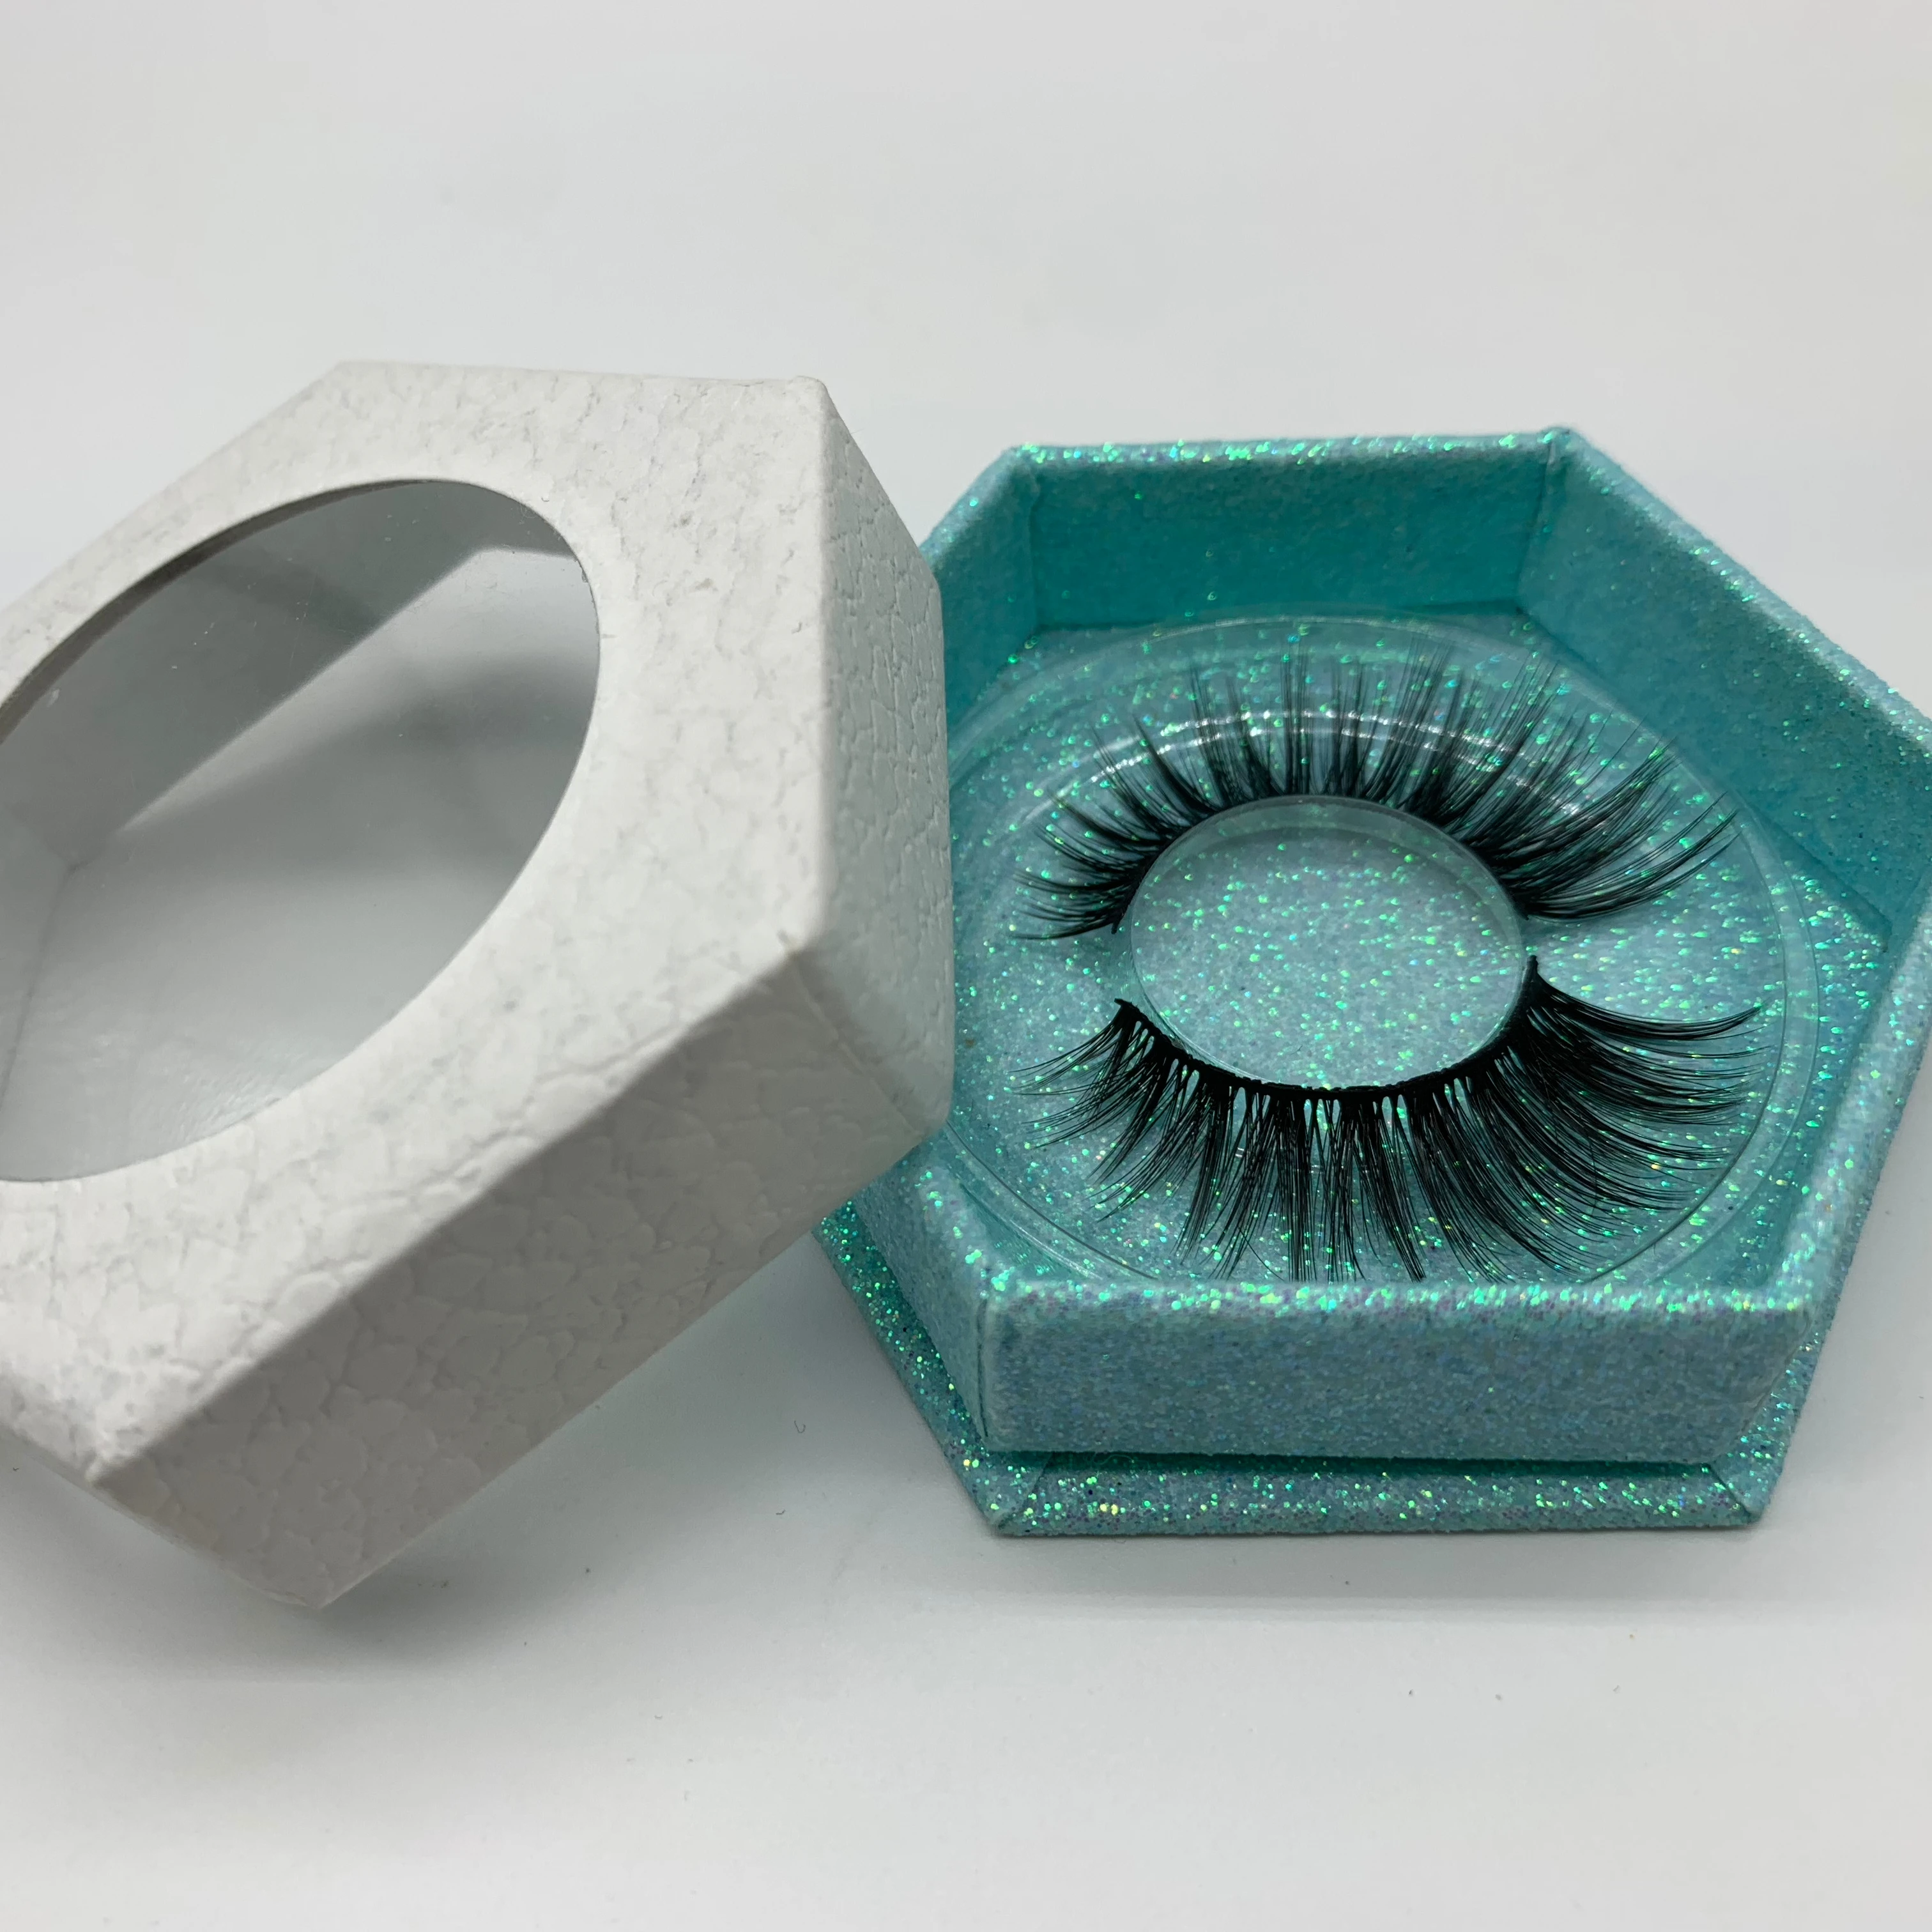 

High Quality eyelash packaging box OEM private label eyelashes 3d mink lashes boxes with eyelashes package, Various colors of boxes are available